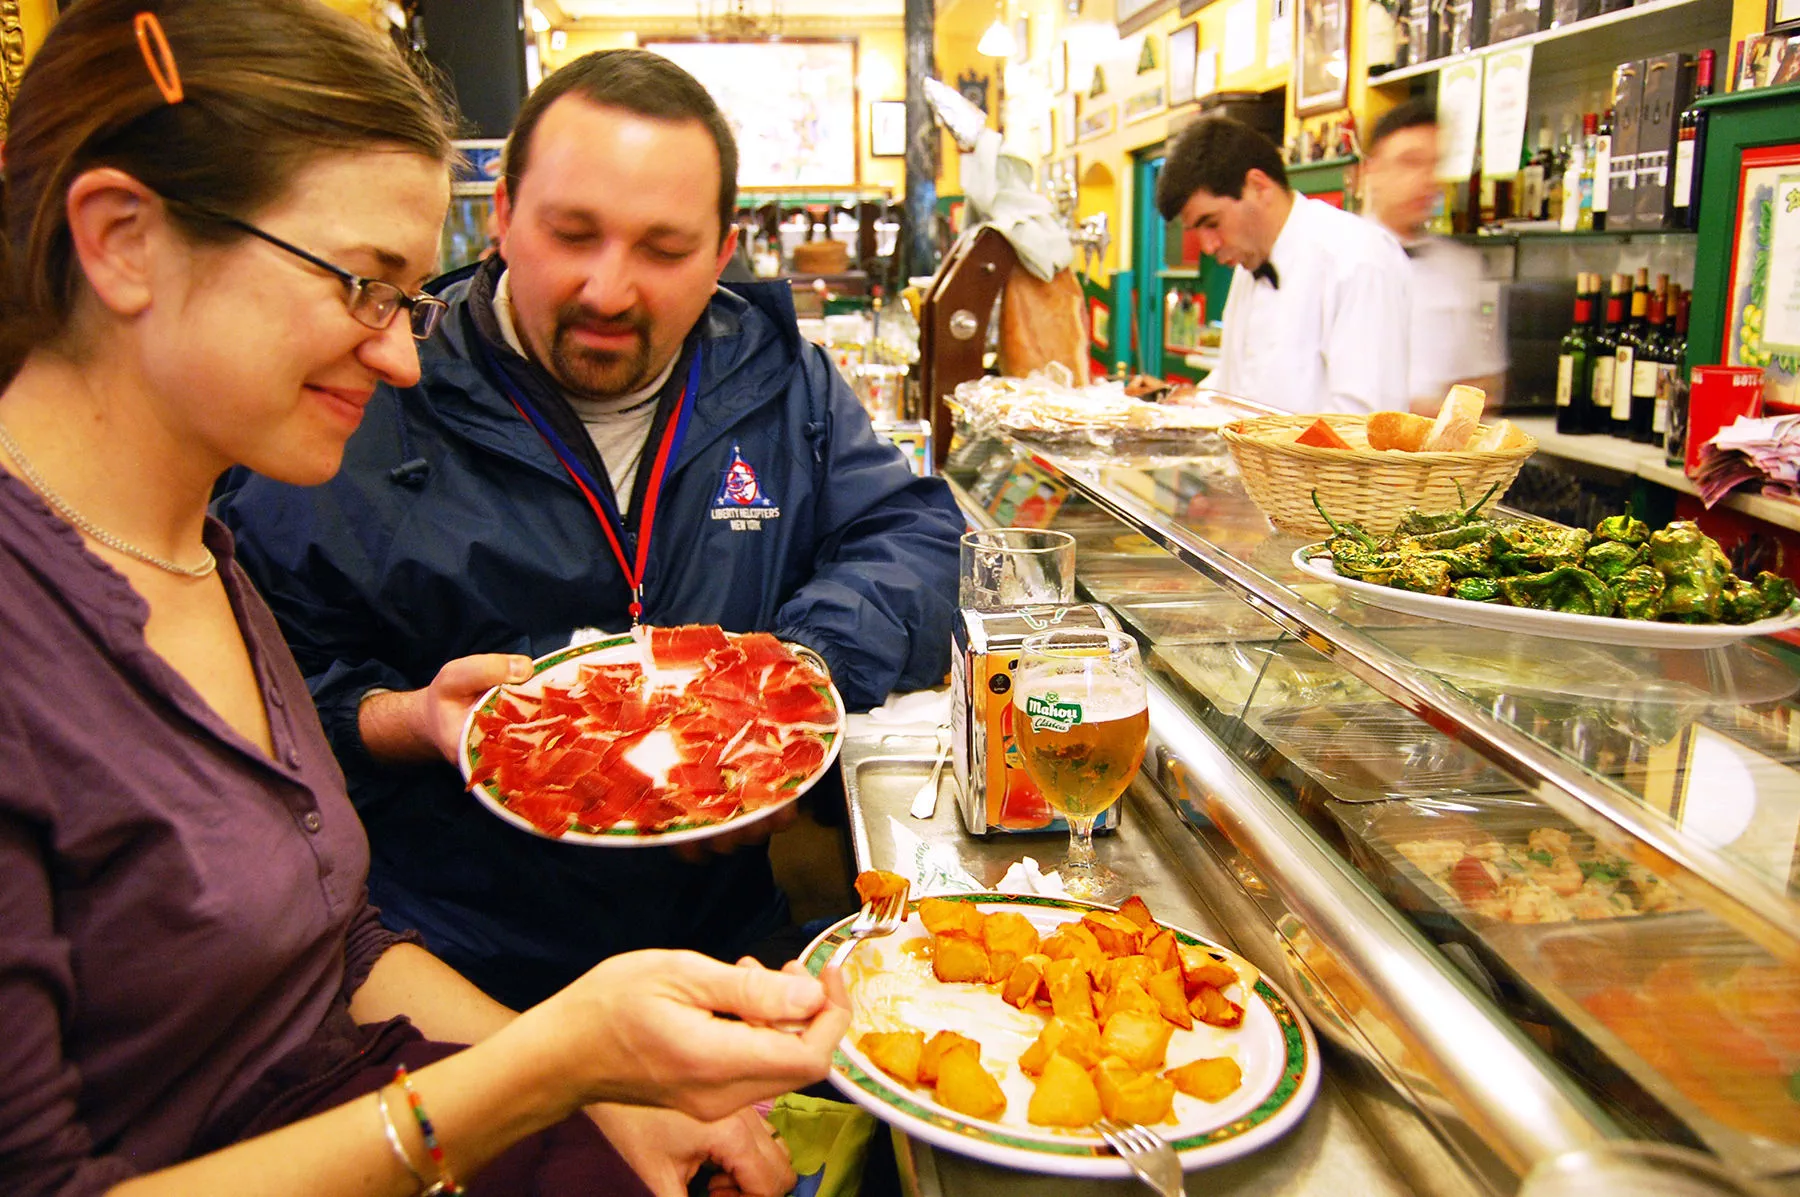 Making a meal of tasty tapas — available in bars throughout the day — is the perfect solution for travelers who can’t wait until 9 or 10 p.m. for dinner